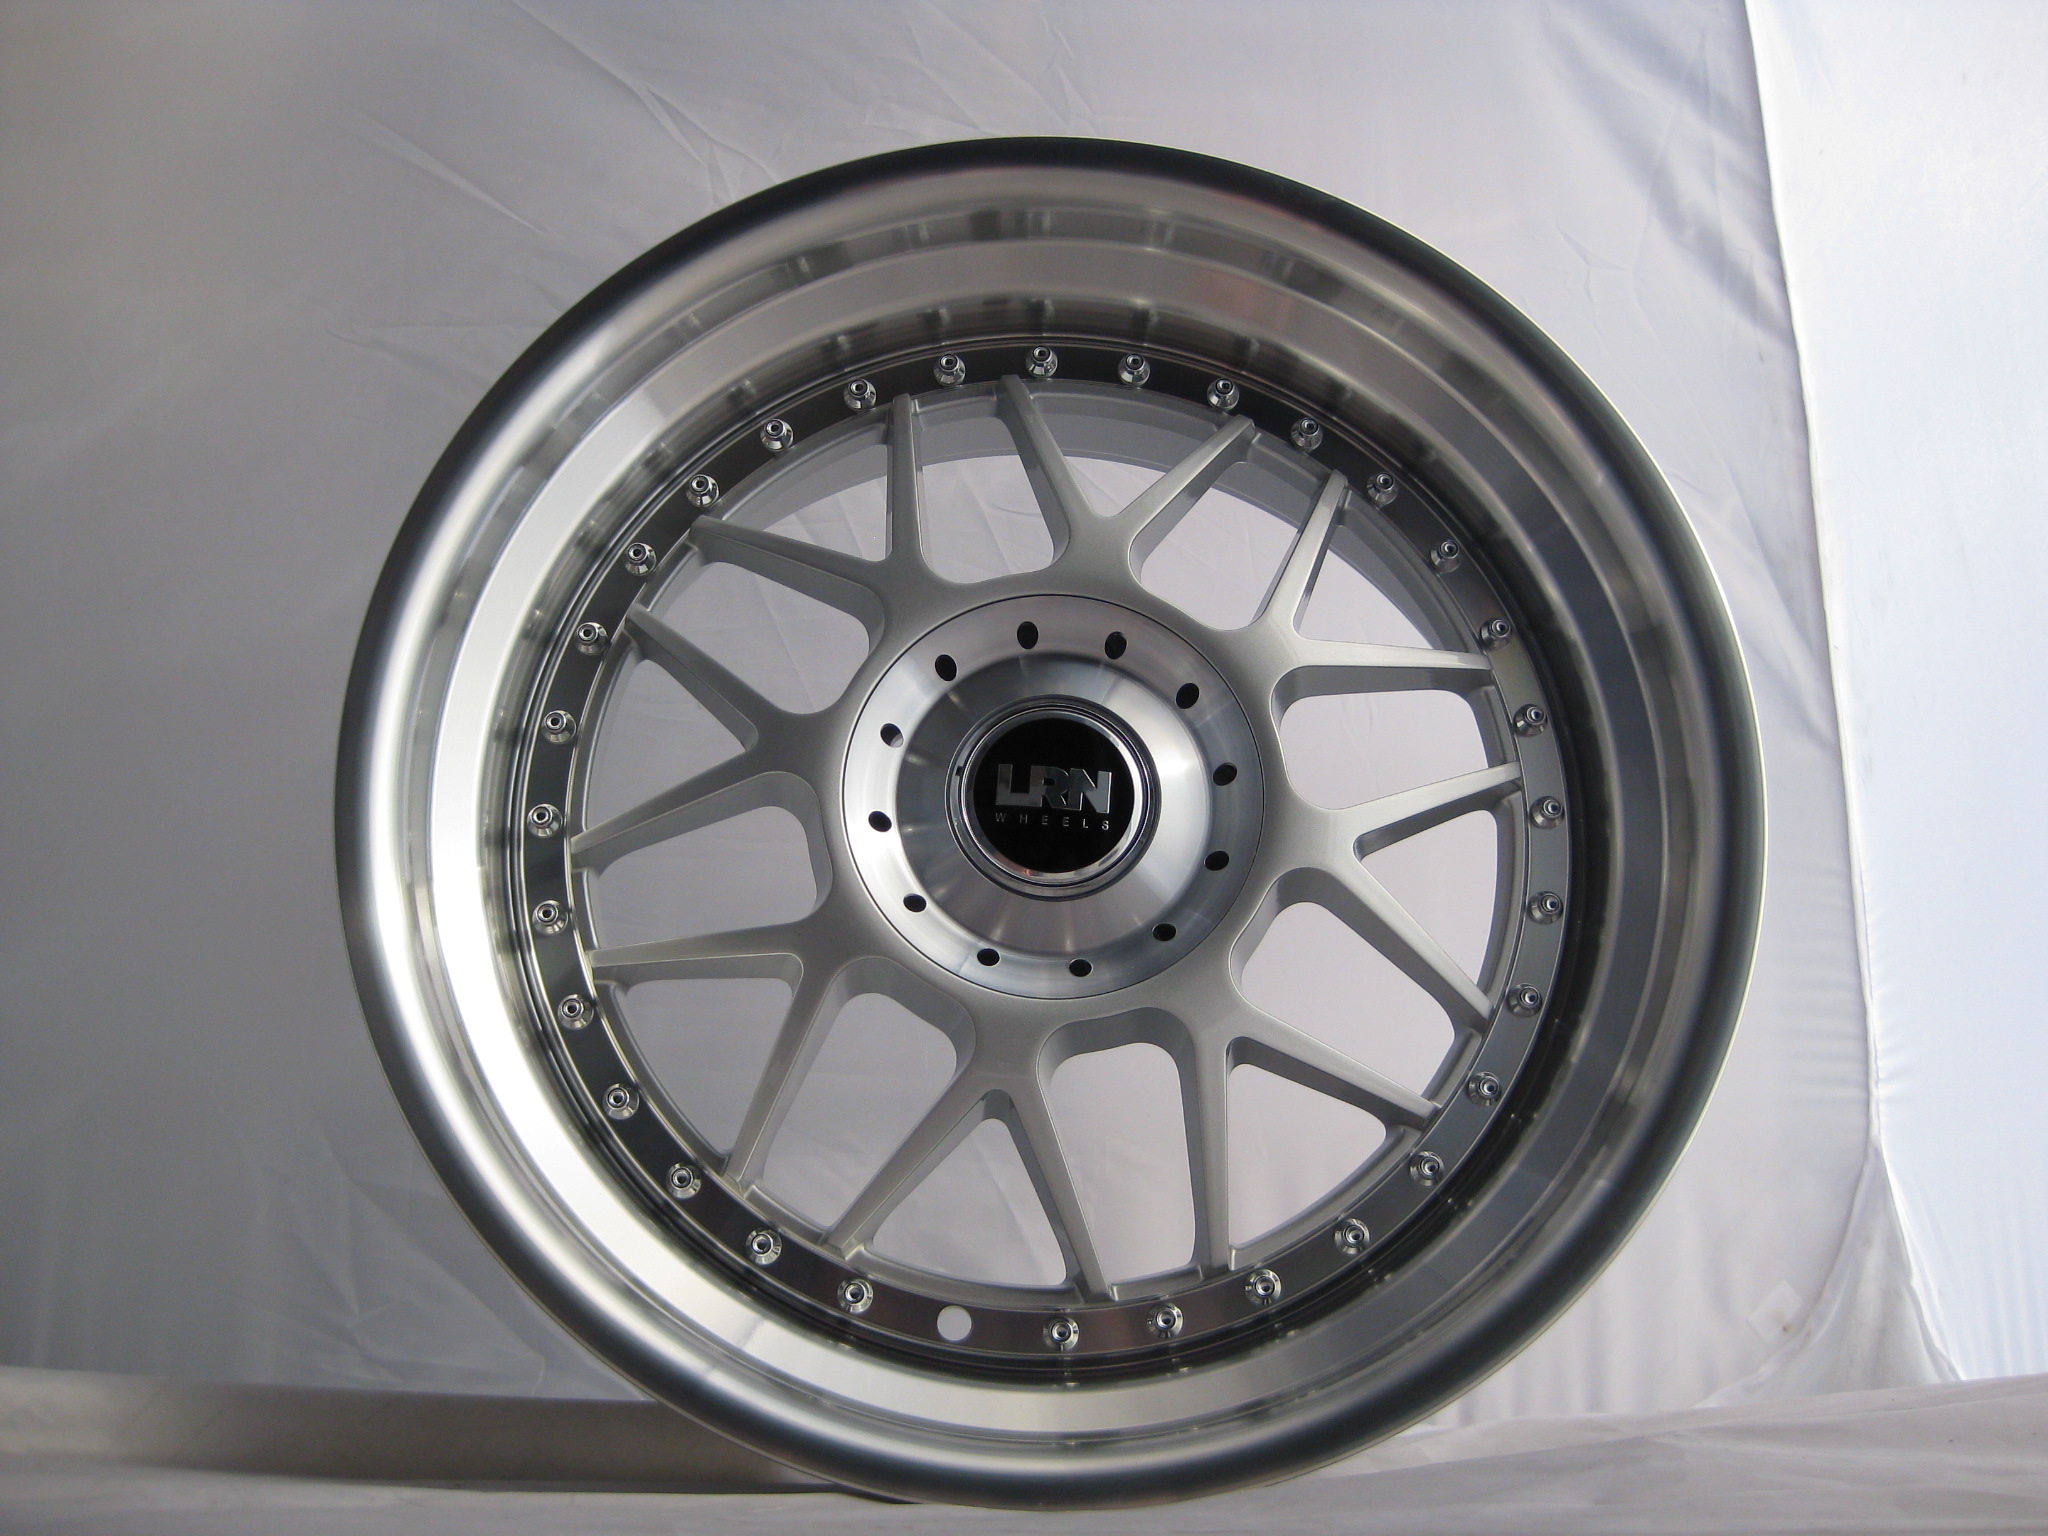 NEW 18" LRN BLITZ ALLOY WHEELS IN SILVER WITH POLISHED STEPPED DISH, DEEPER 9" REAR